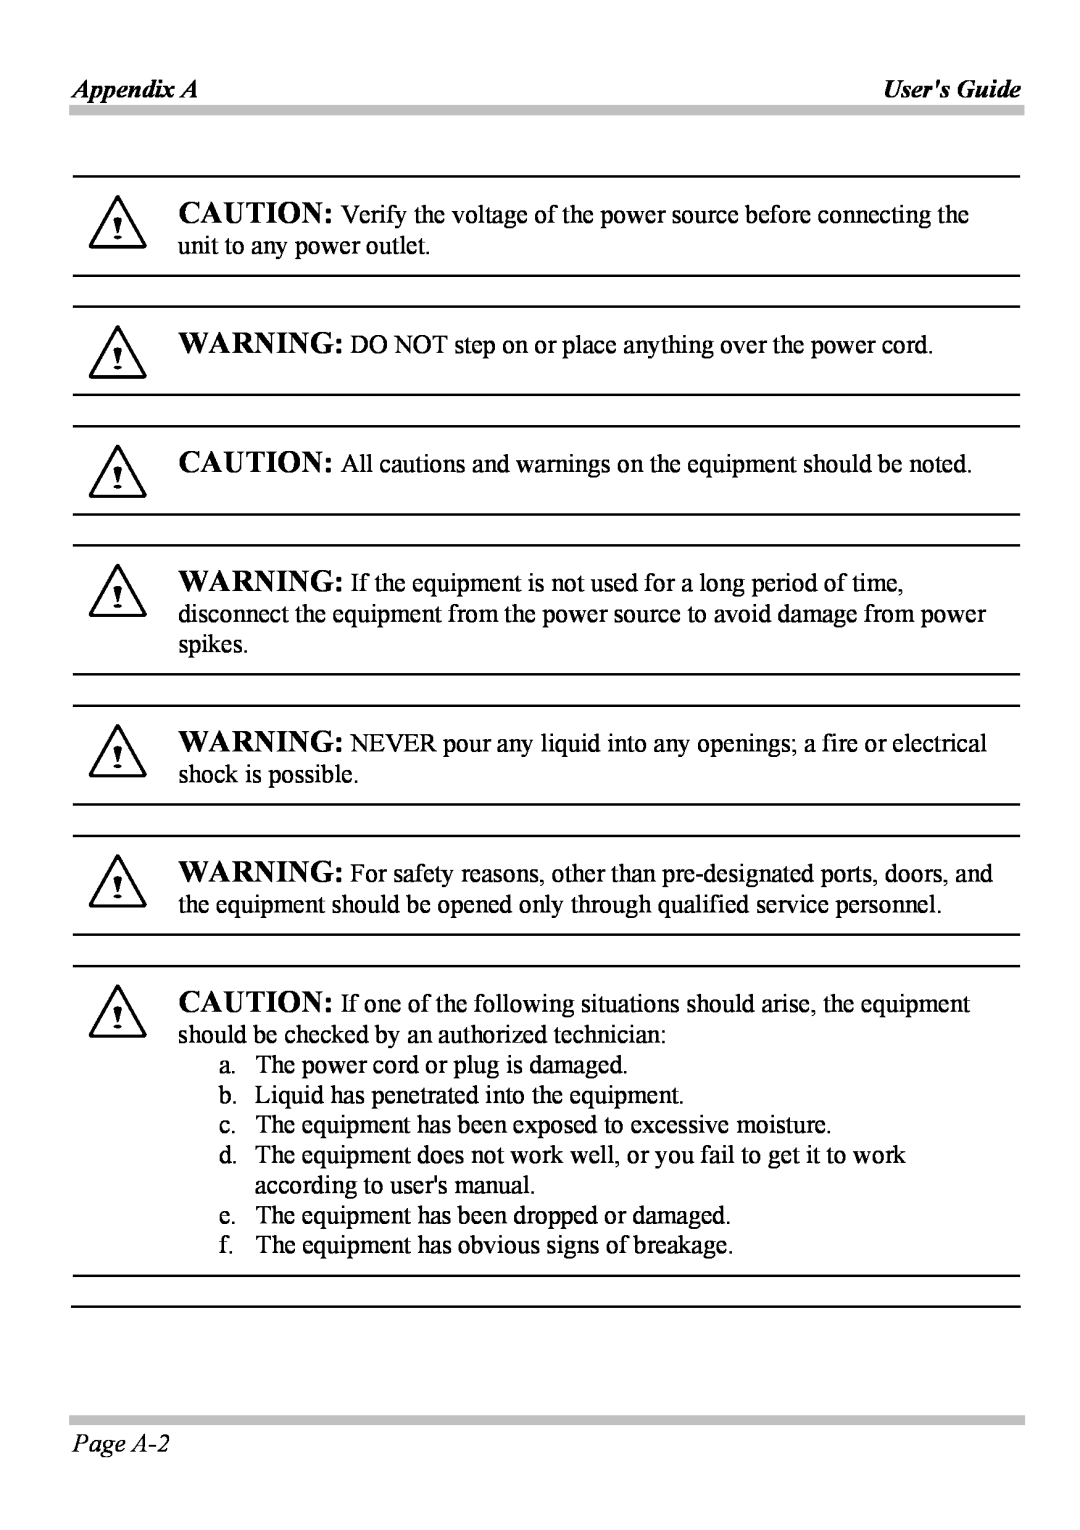 Microsoft W840DI manual Page A-2, Appendix A, Users Guide, WARNING DO NOT step on or place anything over the power cord 